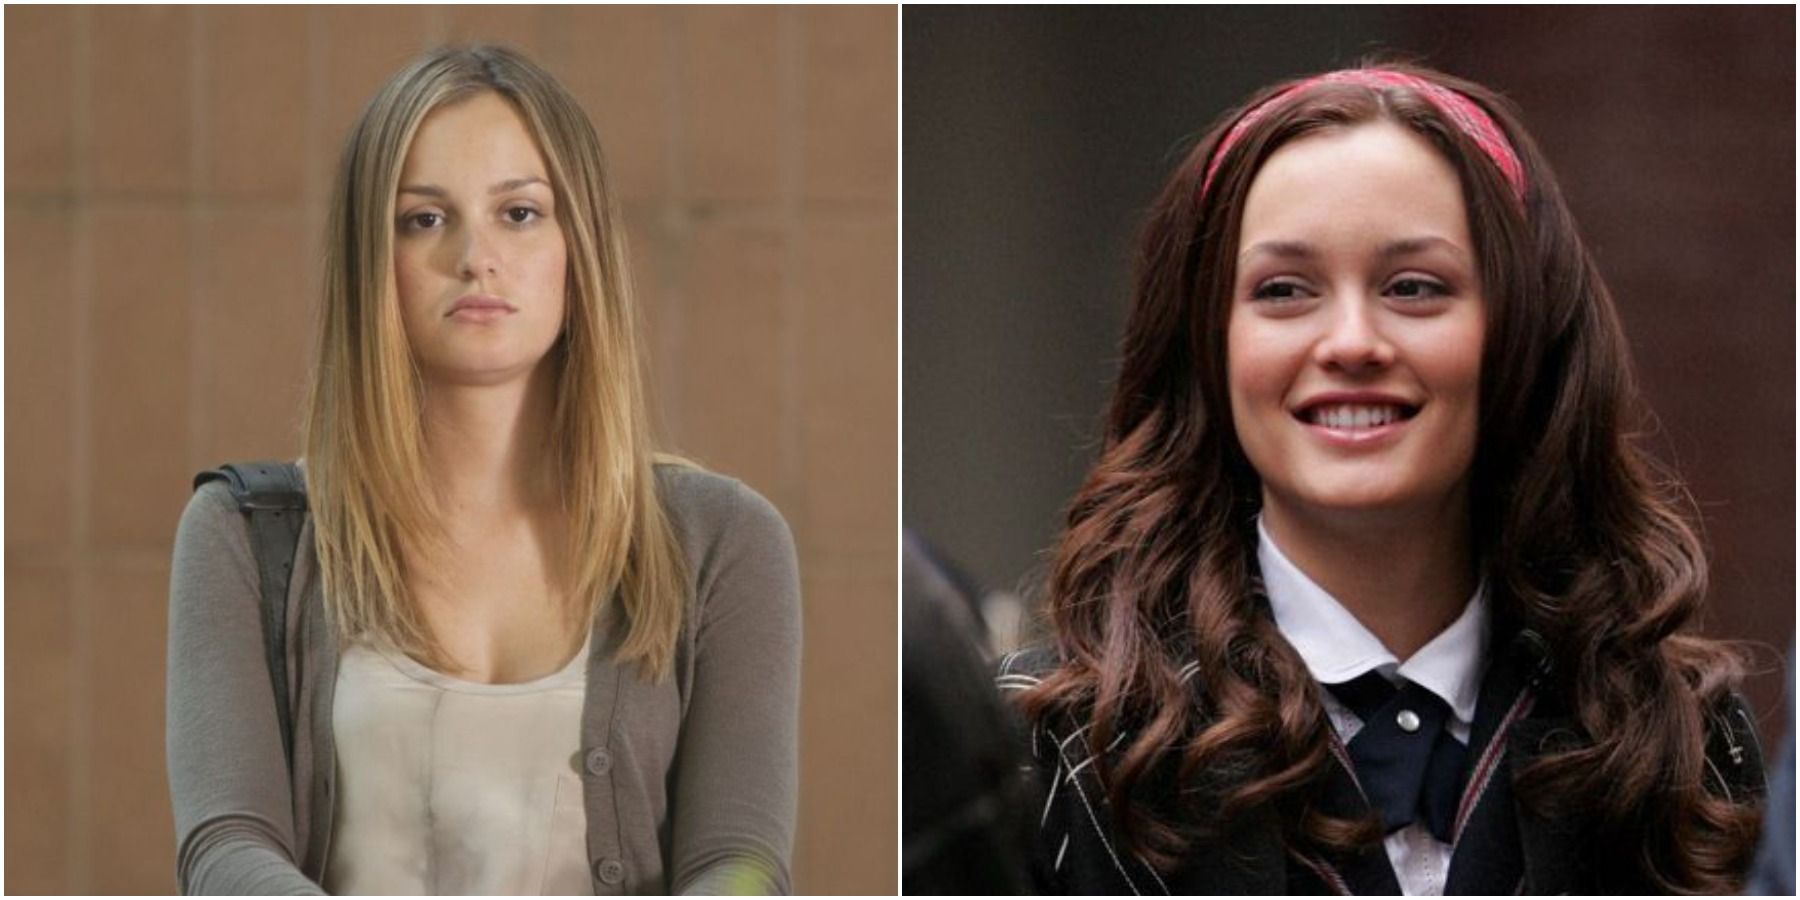 Leighton Meester, featured image